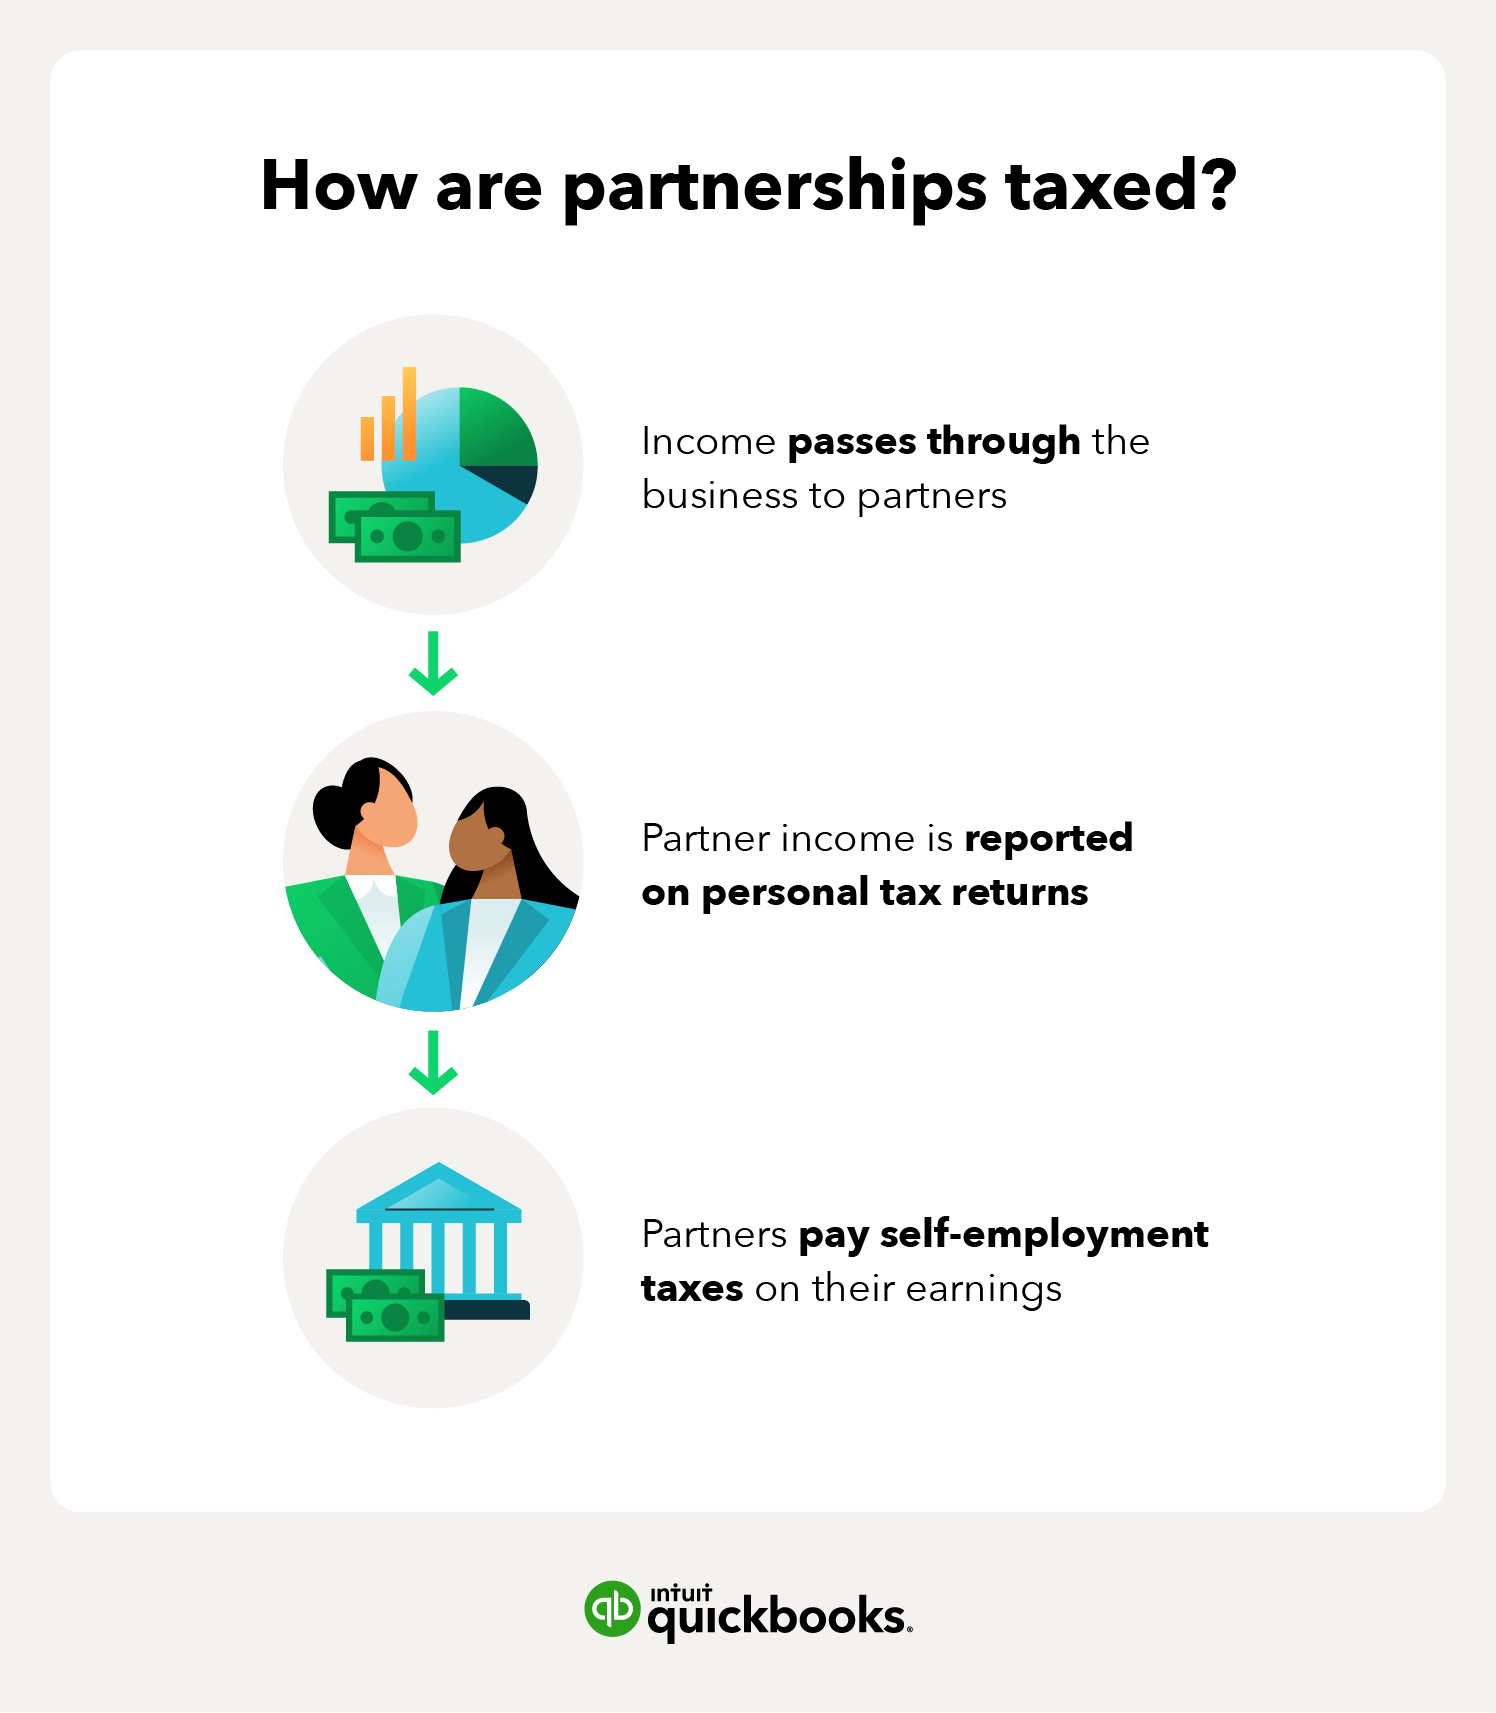 Diagram explaining the stages of partnership taxation: Income passes through the business to partners, and partners report income on their personal tax returns. Then, partners pay self-employment taxes on those earnings.